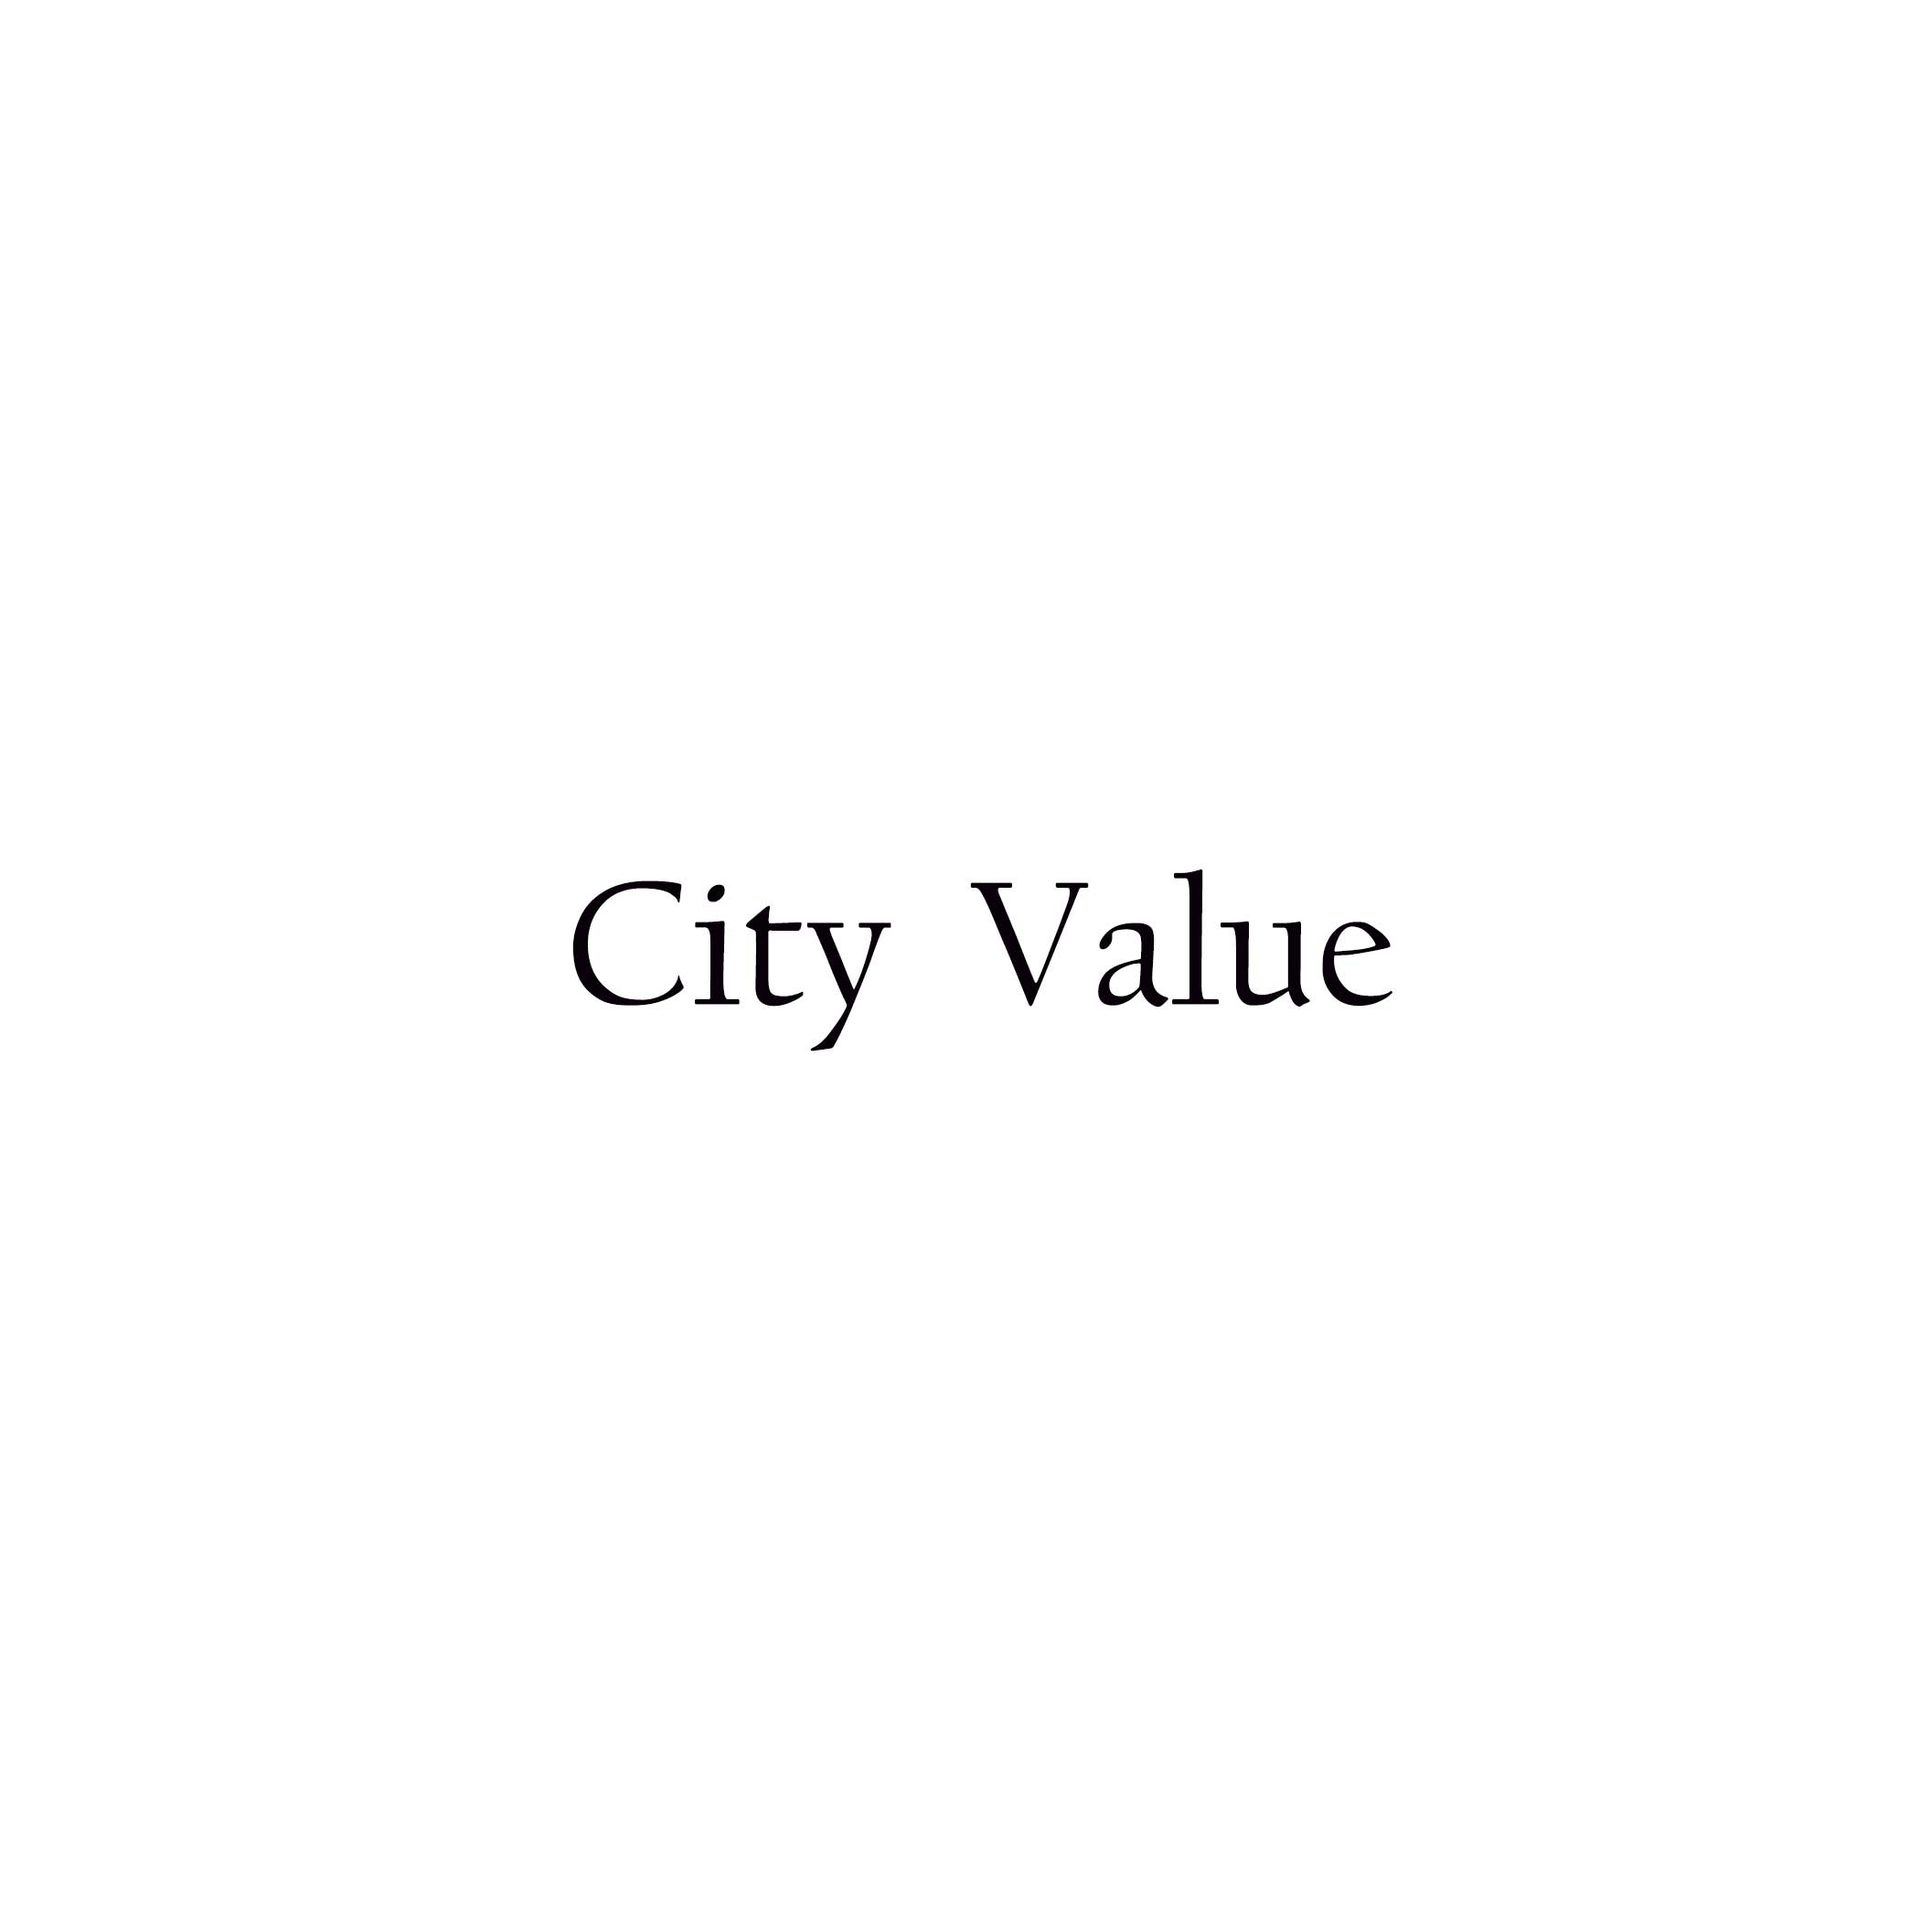 Product Brand: City Value